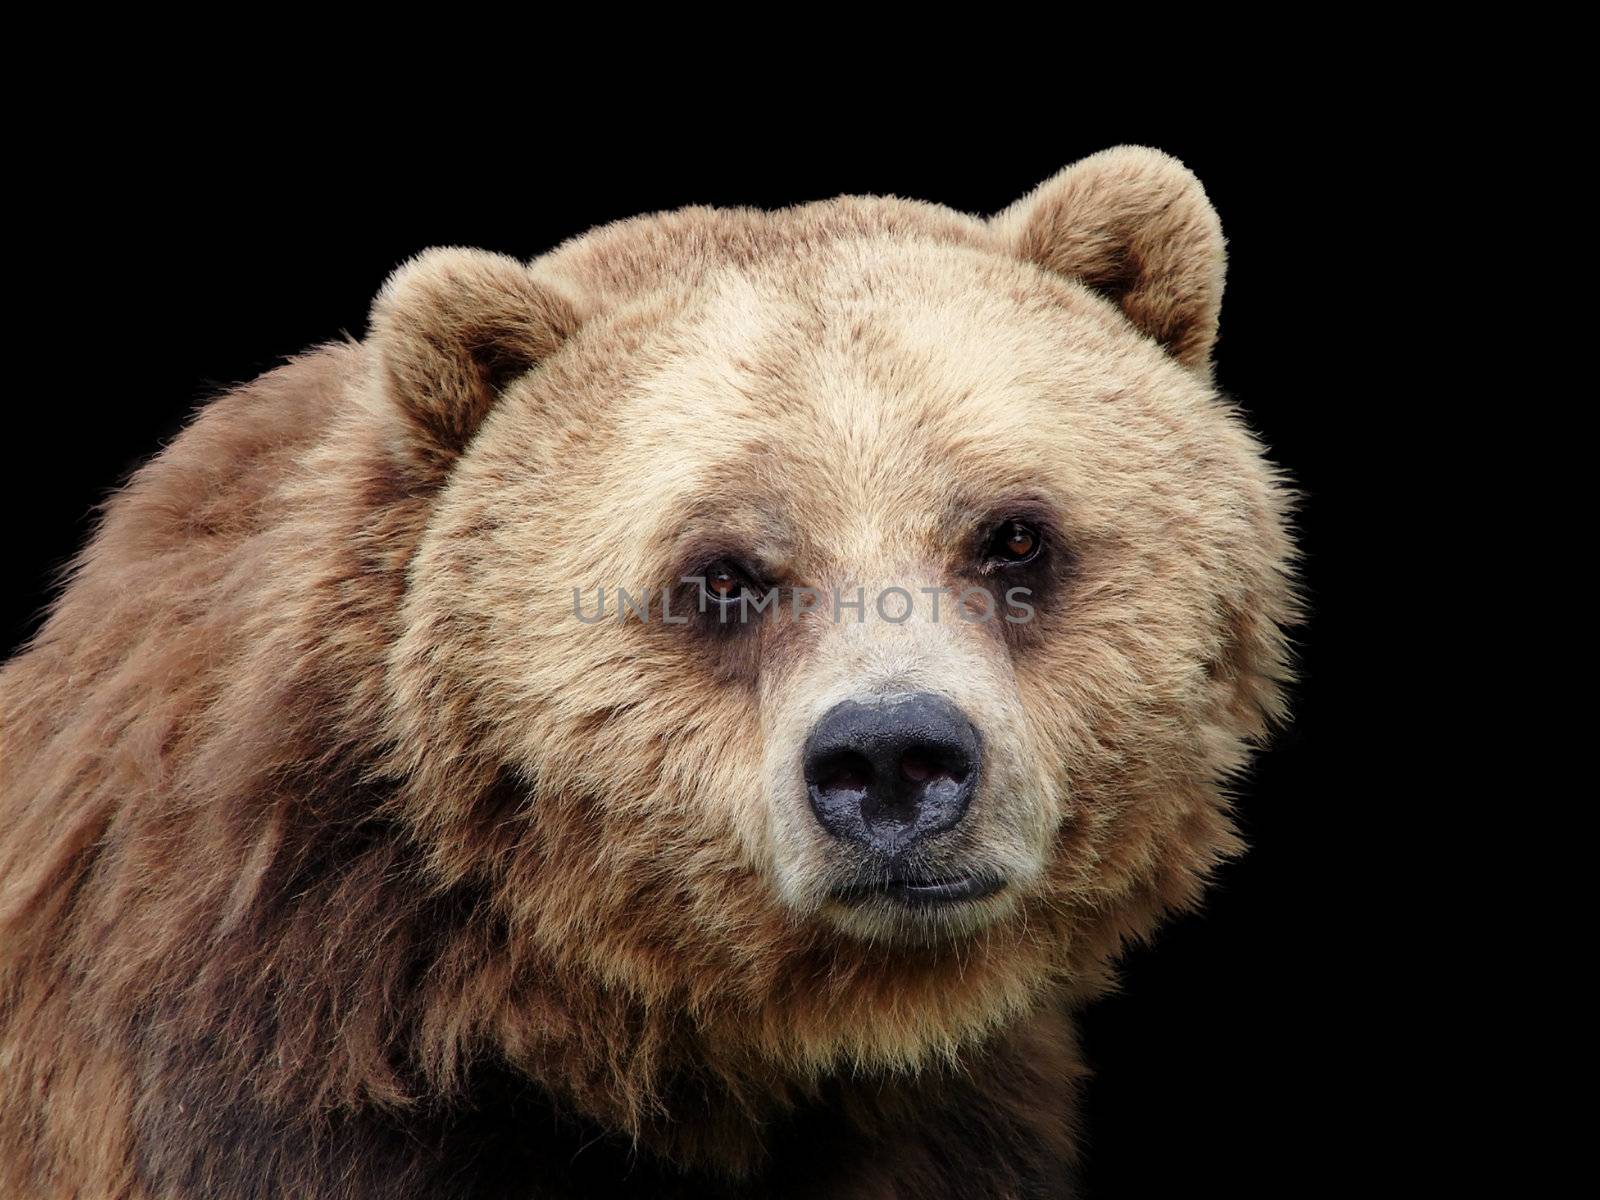 Sad Grizzly bear looking at camera isolated on black by Mirage3